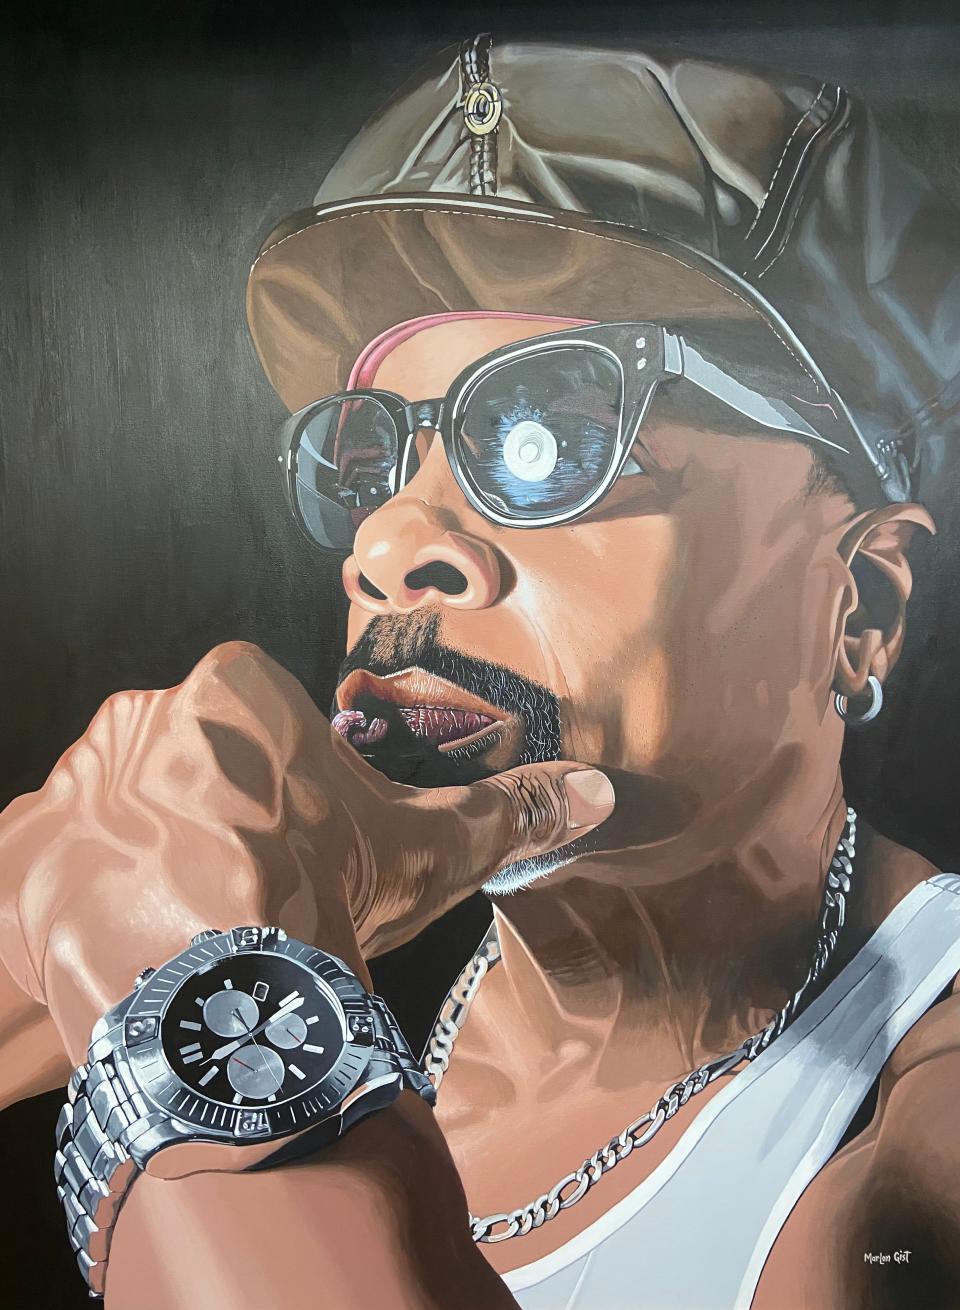 A self-portrait by Marlon Gist whose work will be featured at the Pittsburgh International Airport.